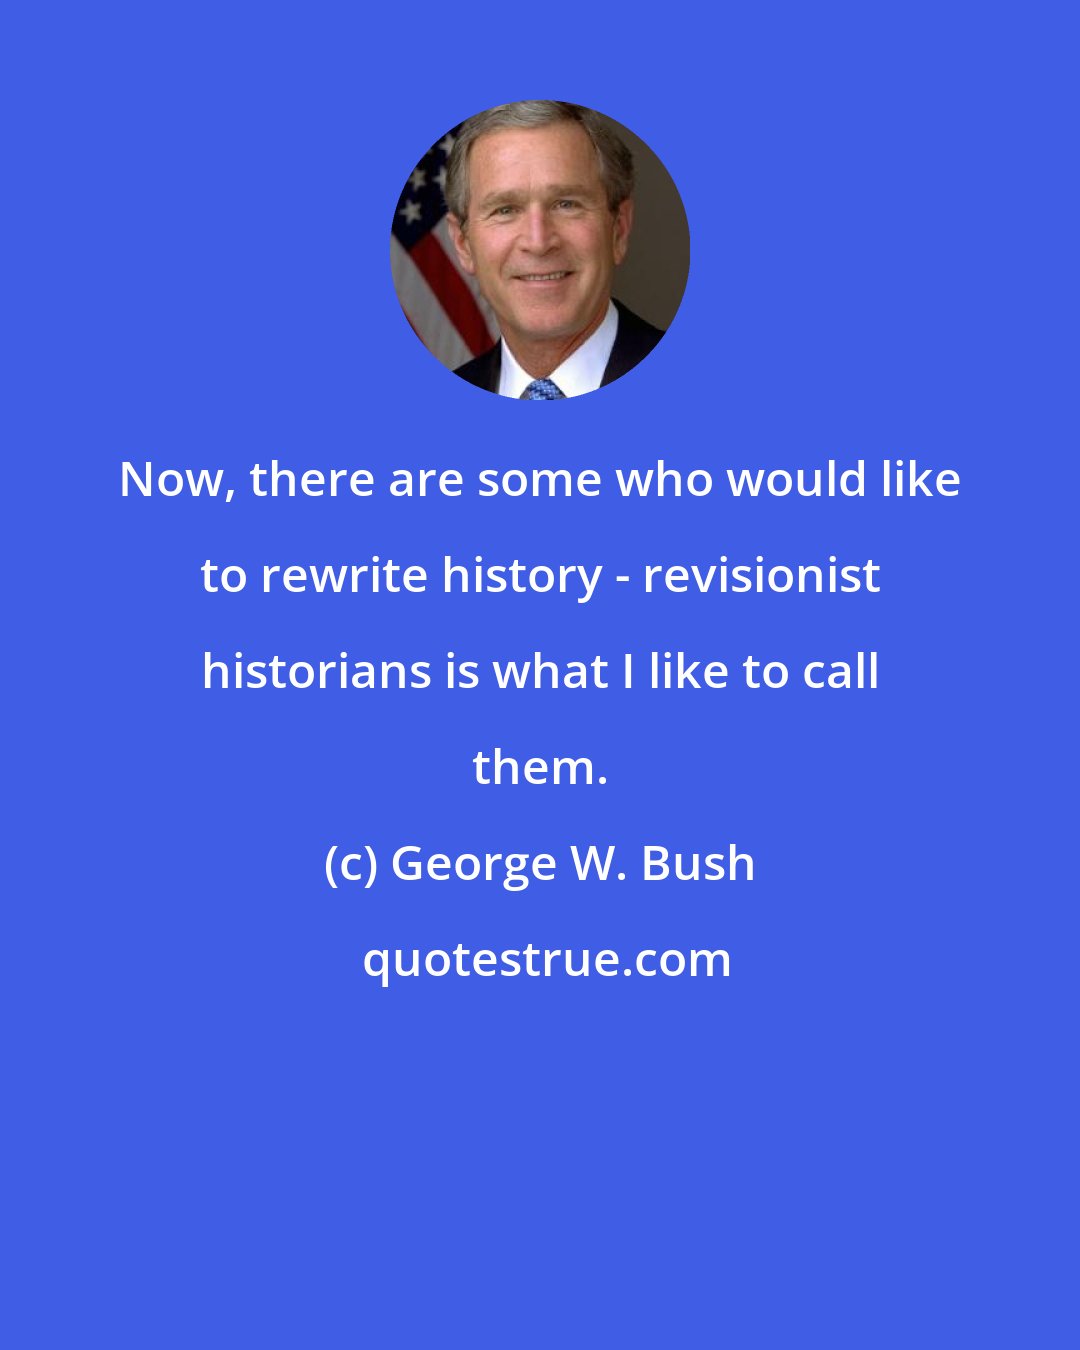 George W. Bush: Now, there are some who would like to rewrite history - revisionist historians is what I like to call them.